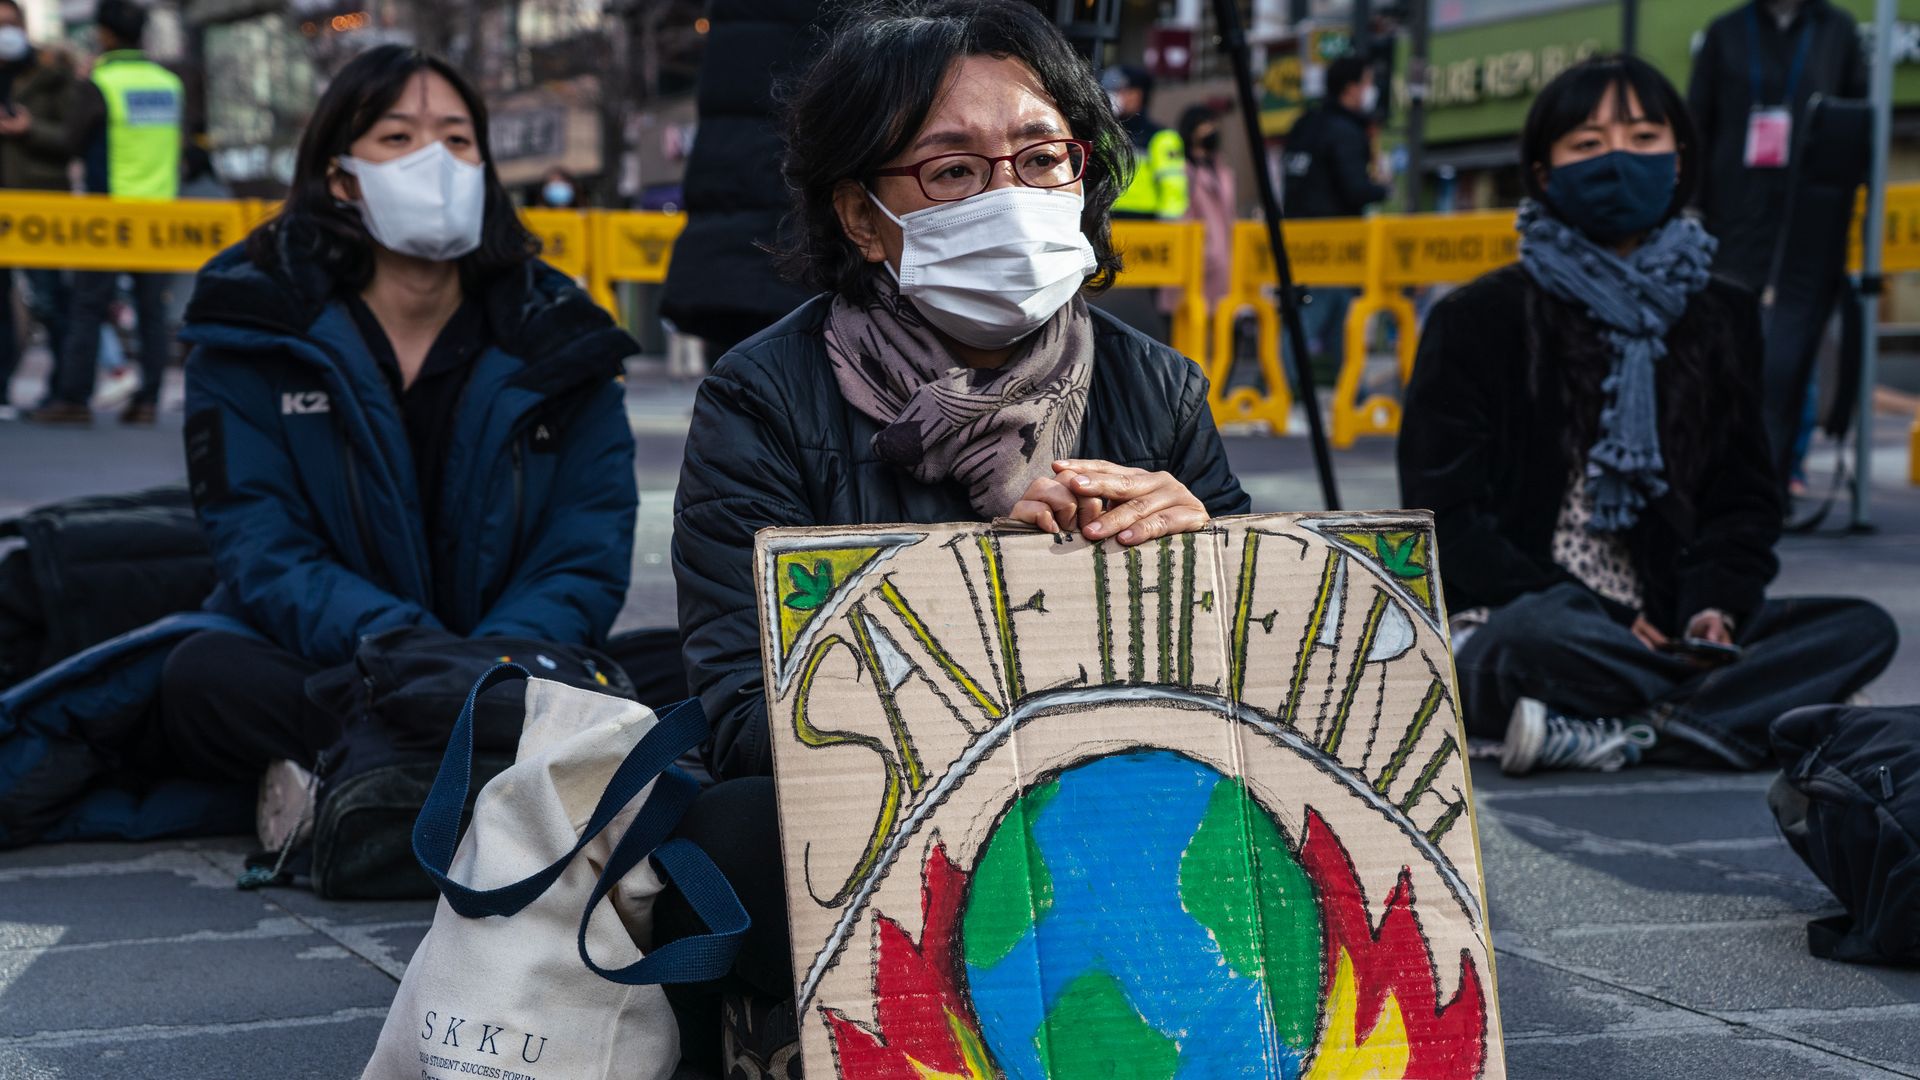 A protestor wearing a face mask displays a placard reading 'Save The Earth' during the climate crisis protest in Seoul. Photo: Simon Shin/SOPA Images/LightRocket via Getty Images